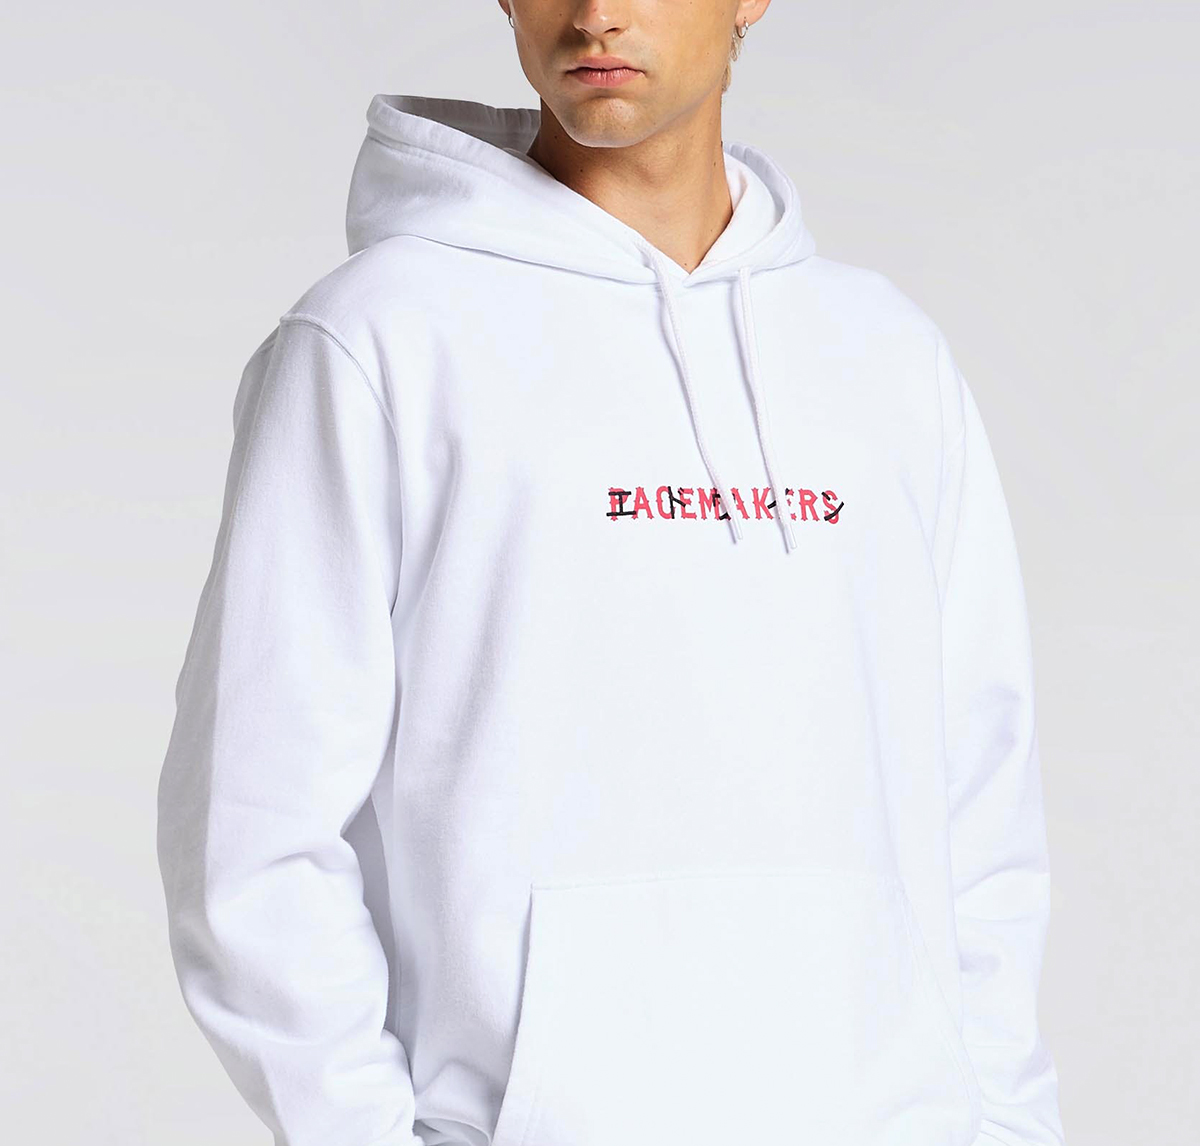 EDWIN Pacemaker - Eagle Hoodie - White front detail